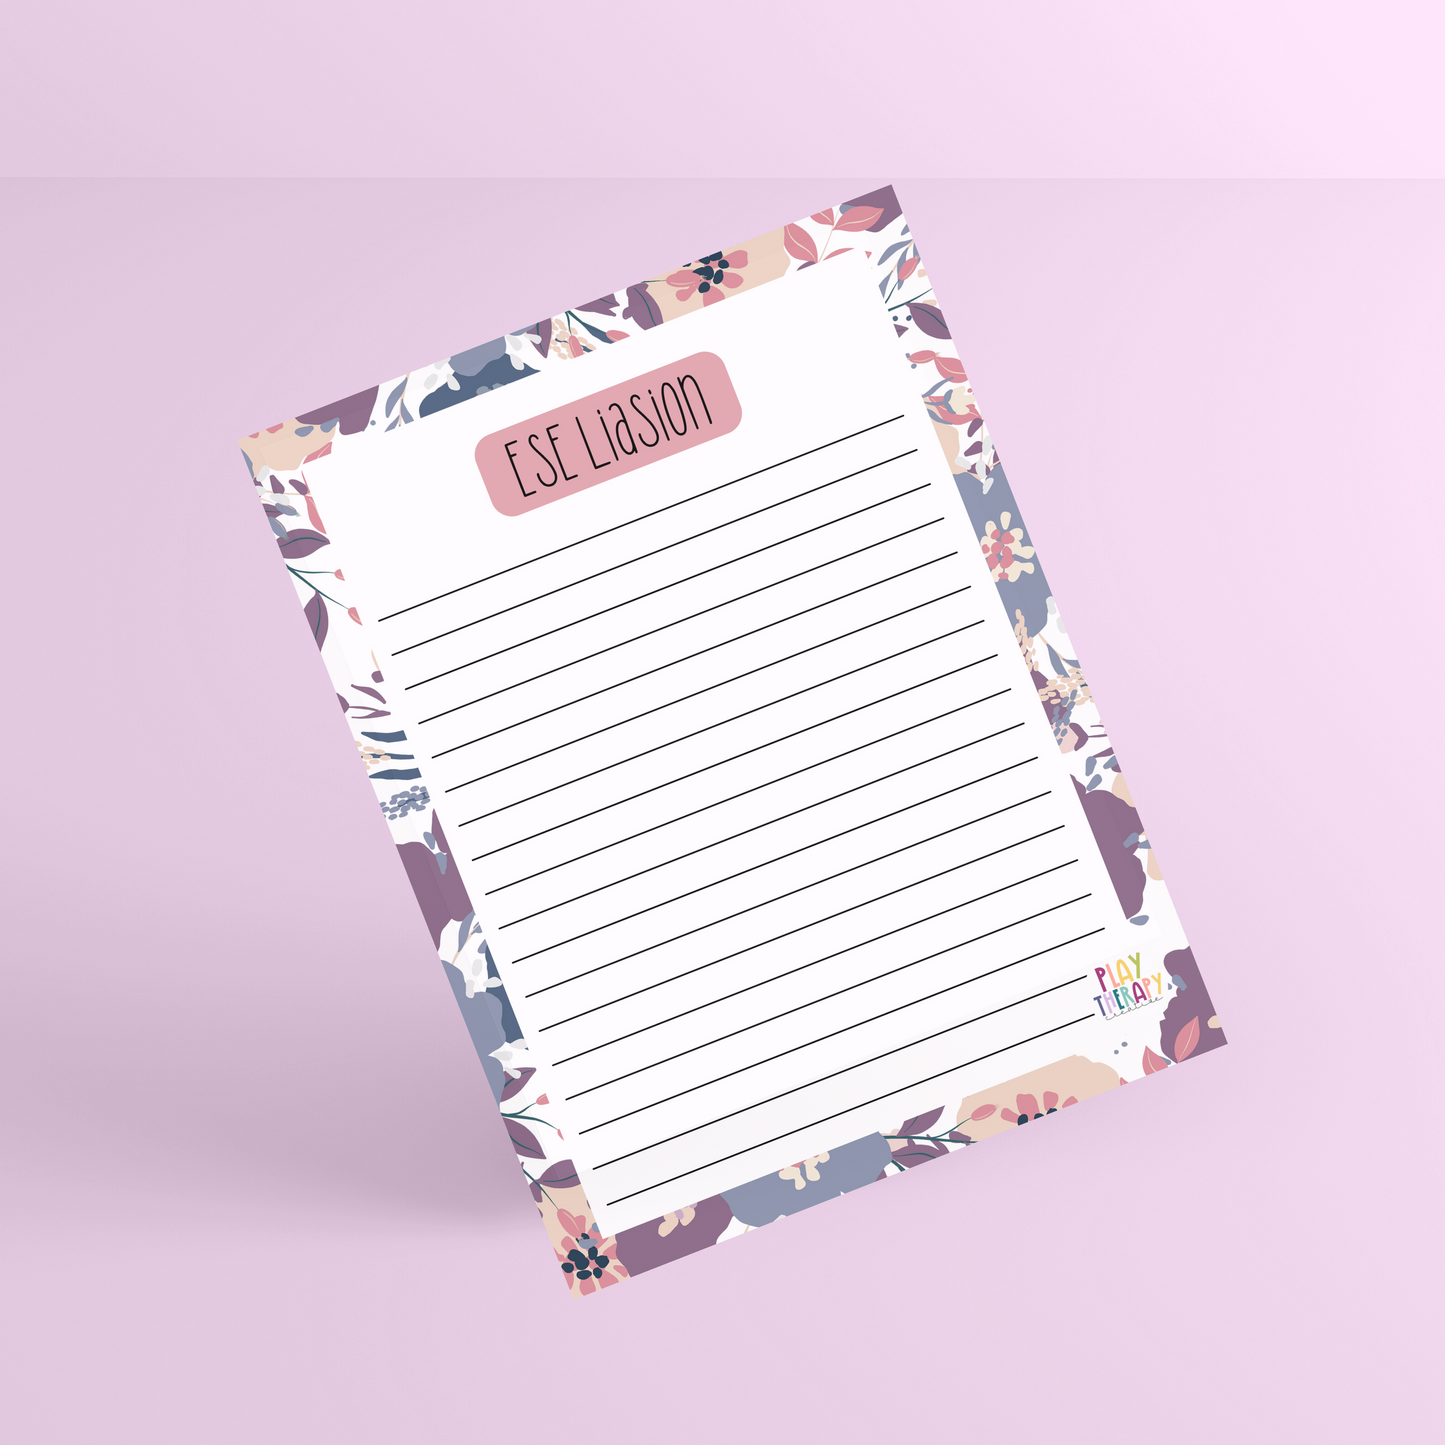 Floral ESE Liaison Notepad